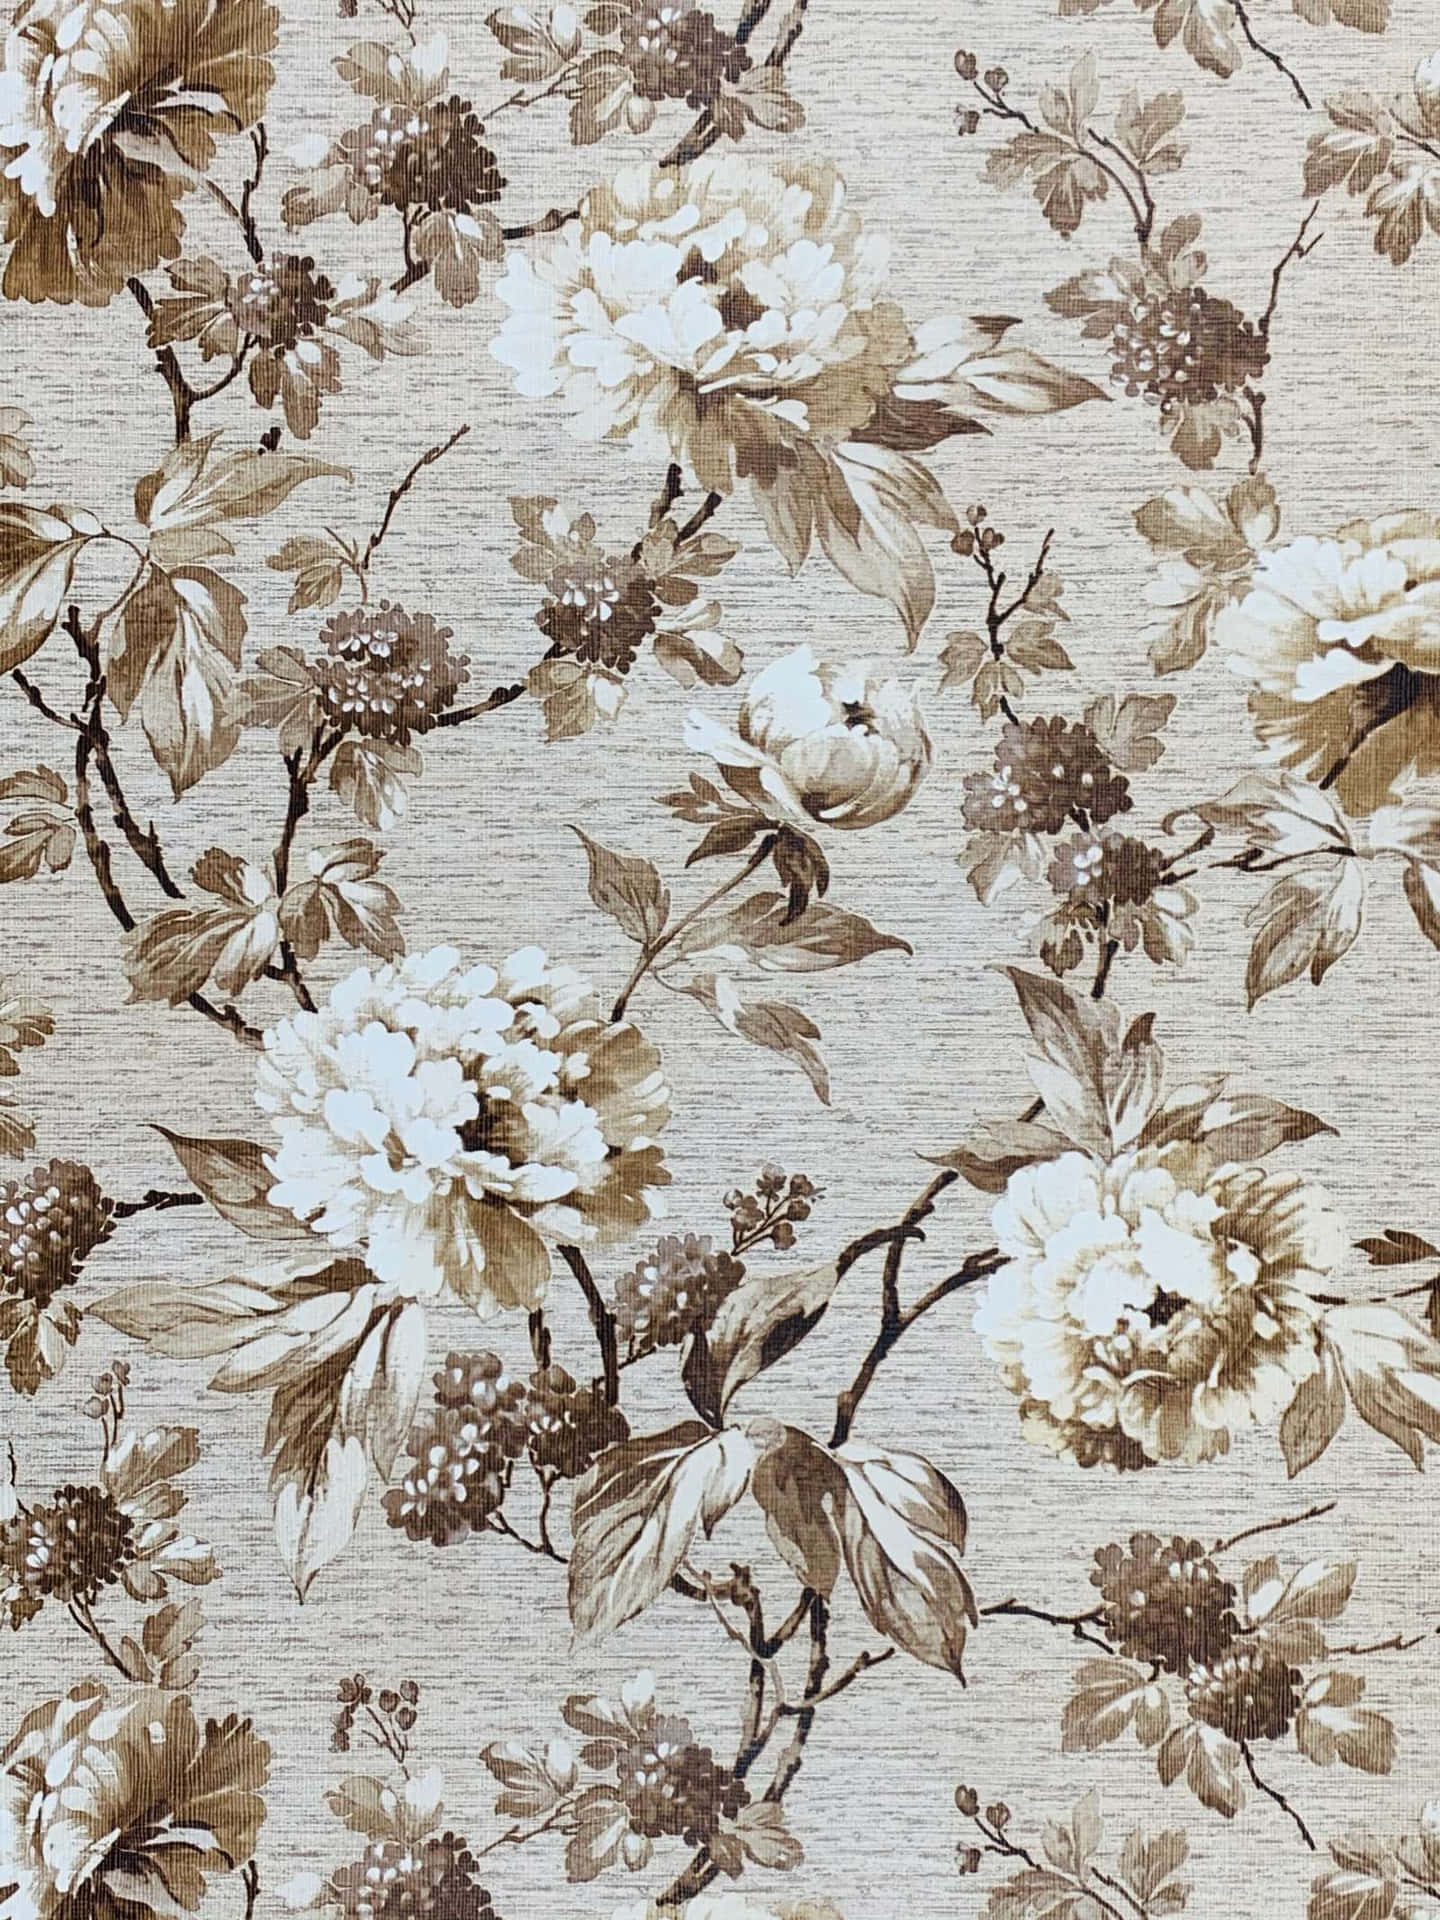 A Beige And Brown Floral Wallpaper